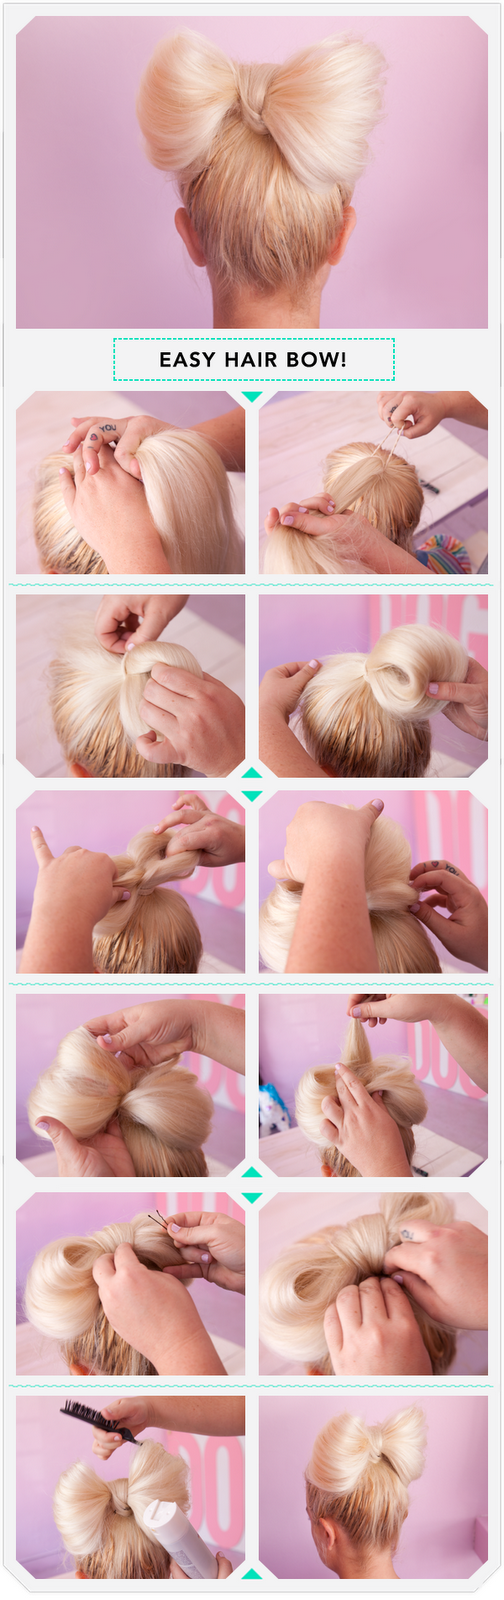 I tried this on my 7 year old daughter who has very thin hair and it still worke